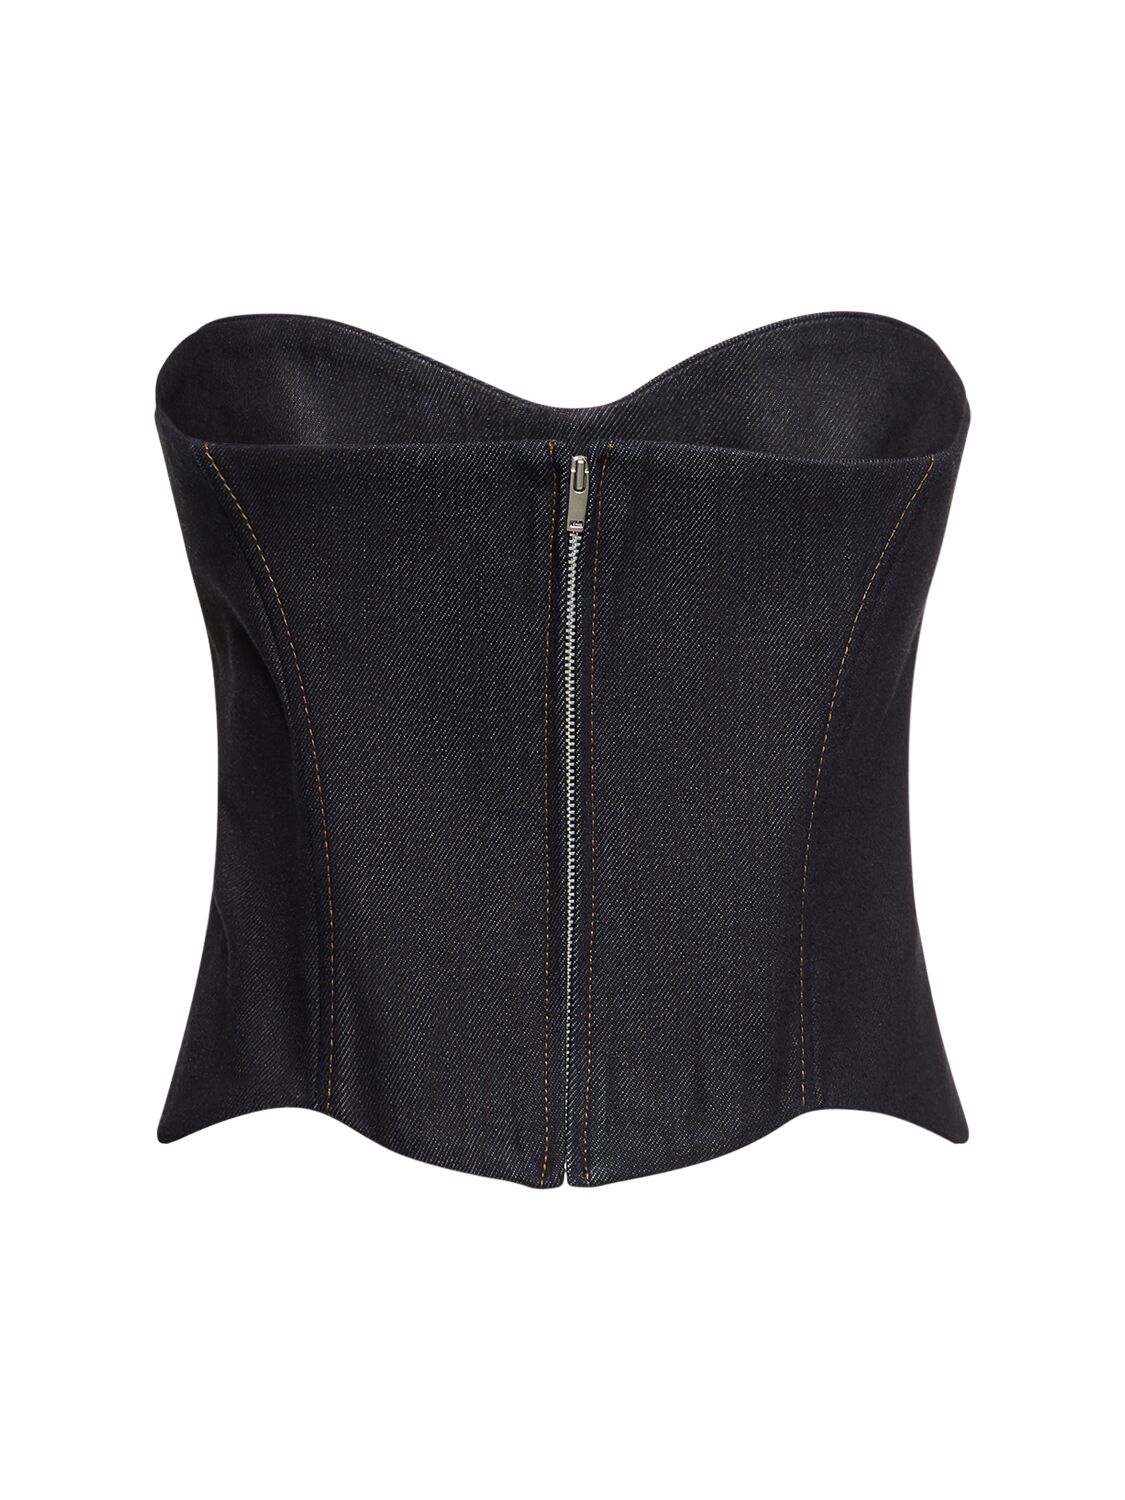 Keira Faux Leather Halter Corset Top